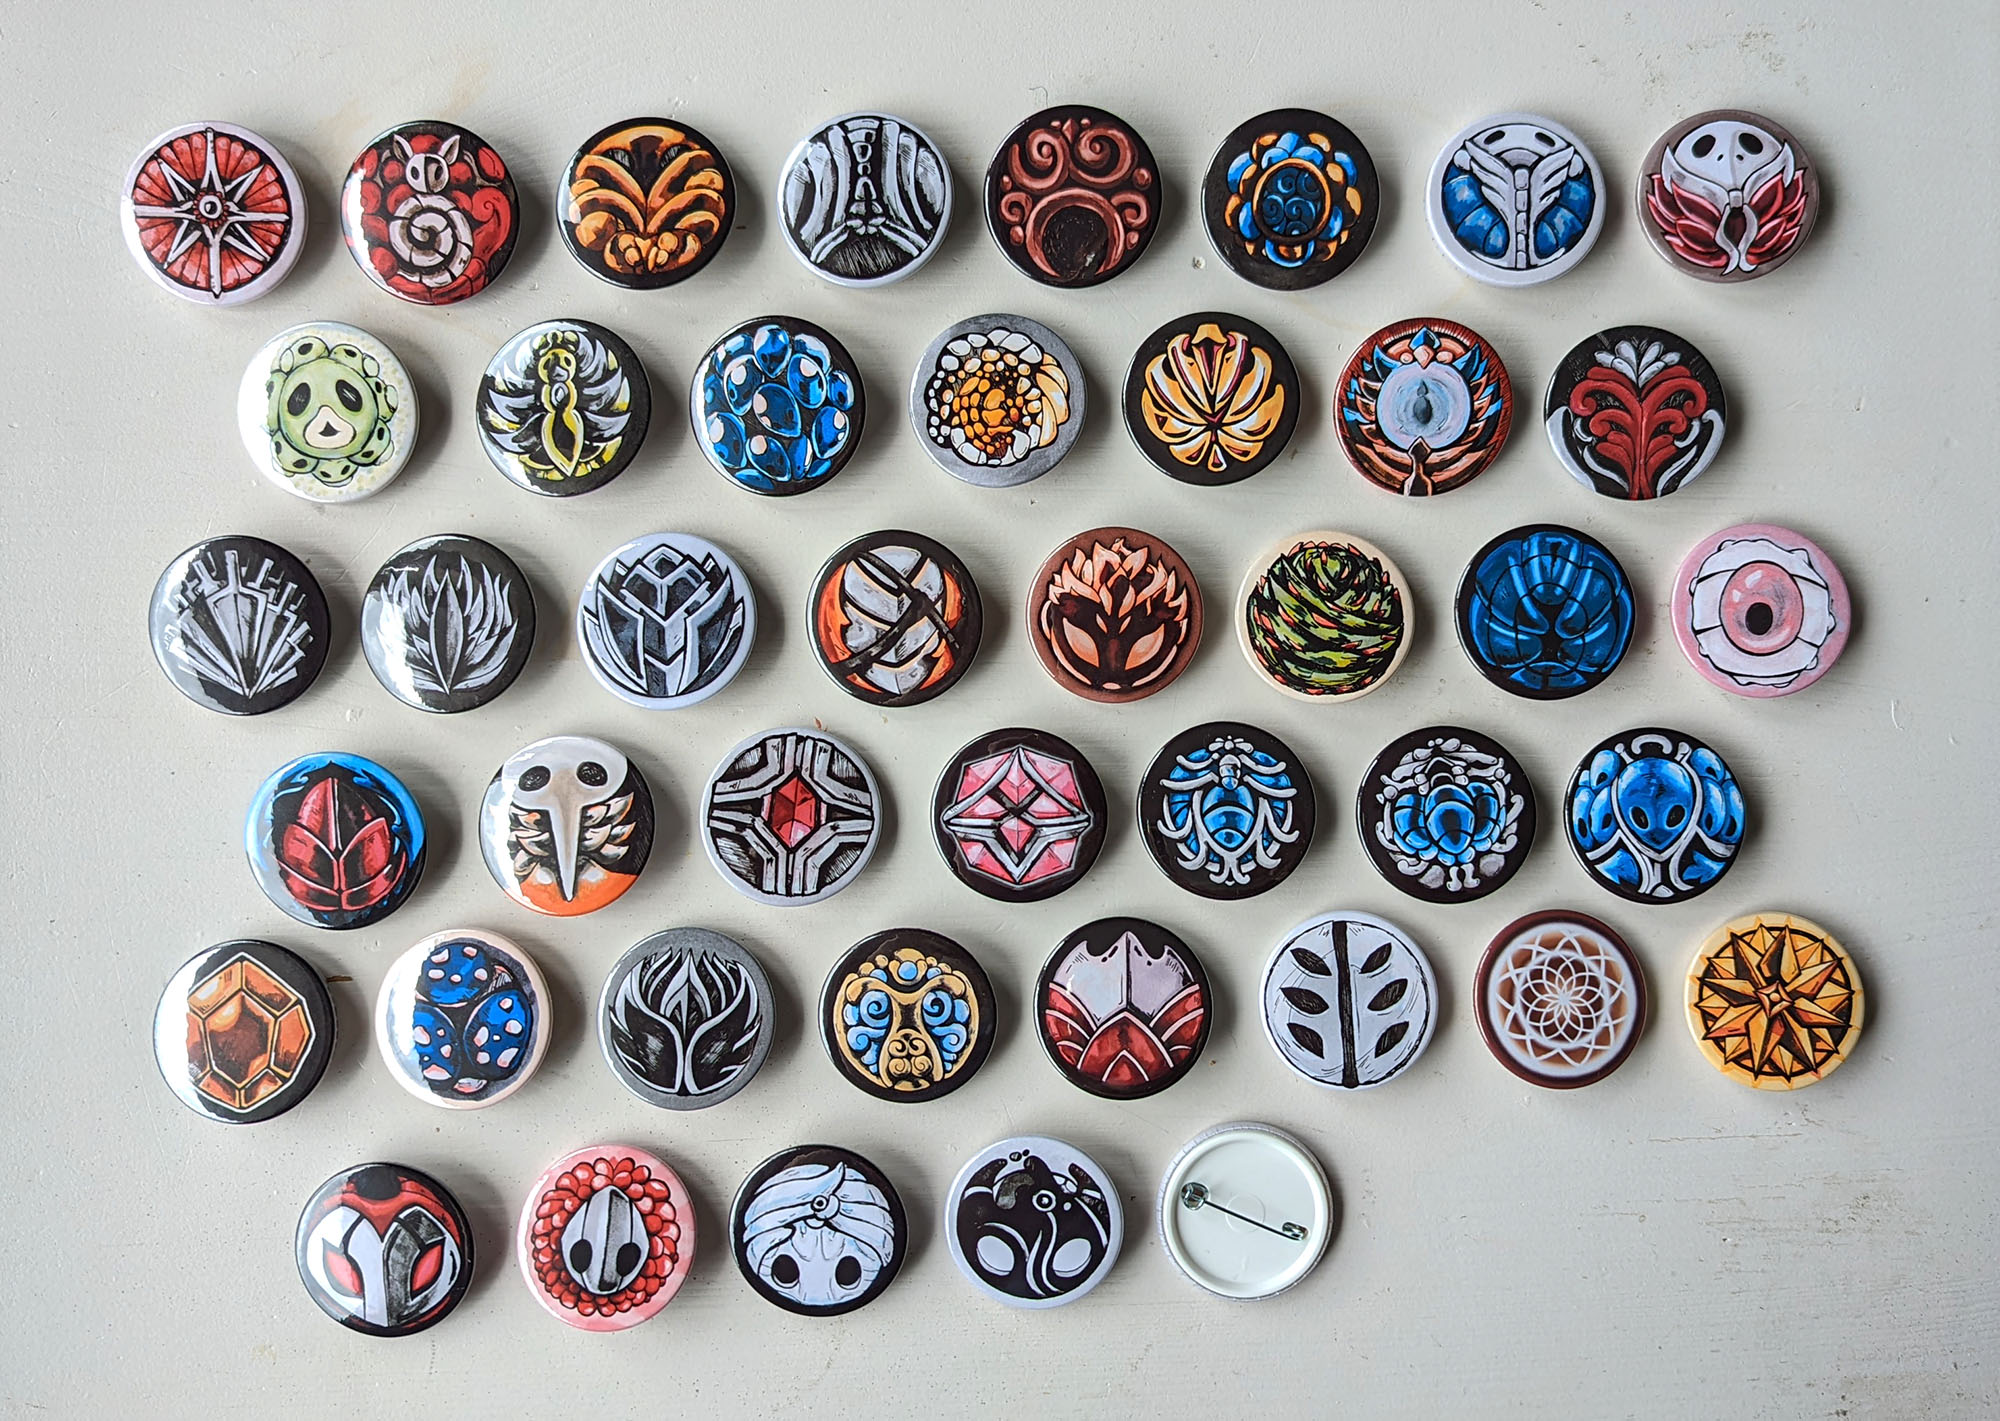 Foto-Hollow-Knight-buttons-2022-A-webshop by .